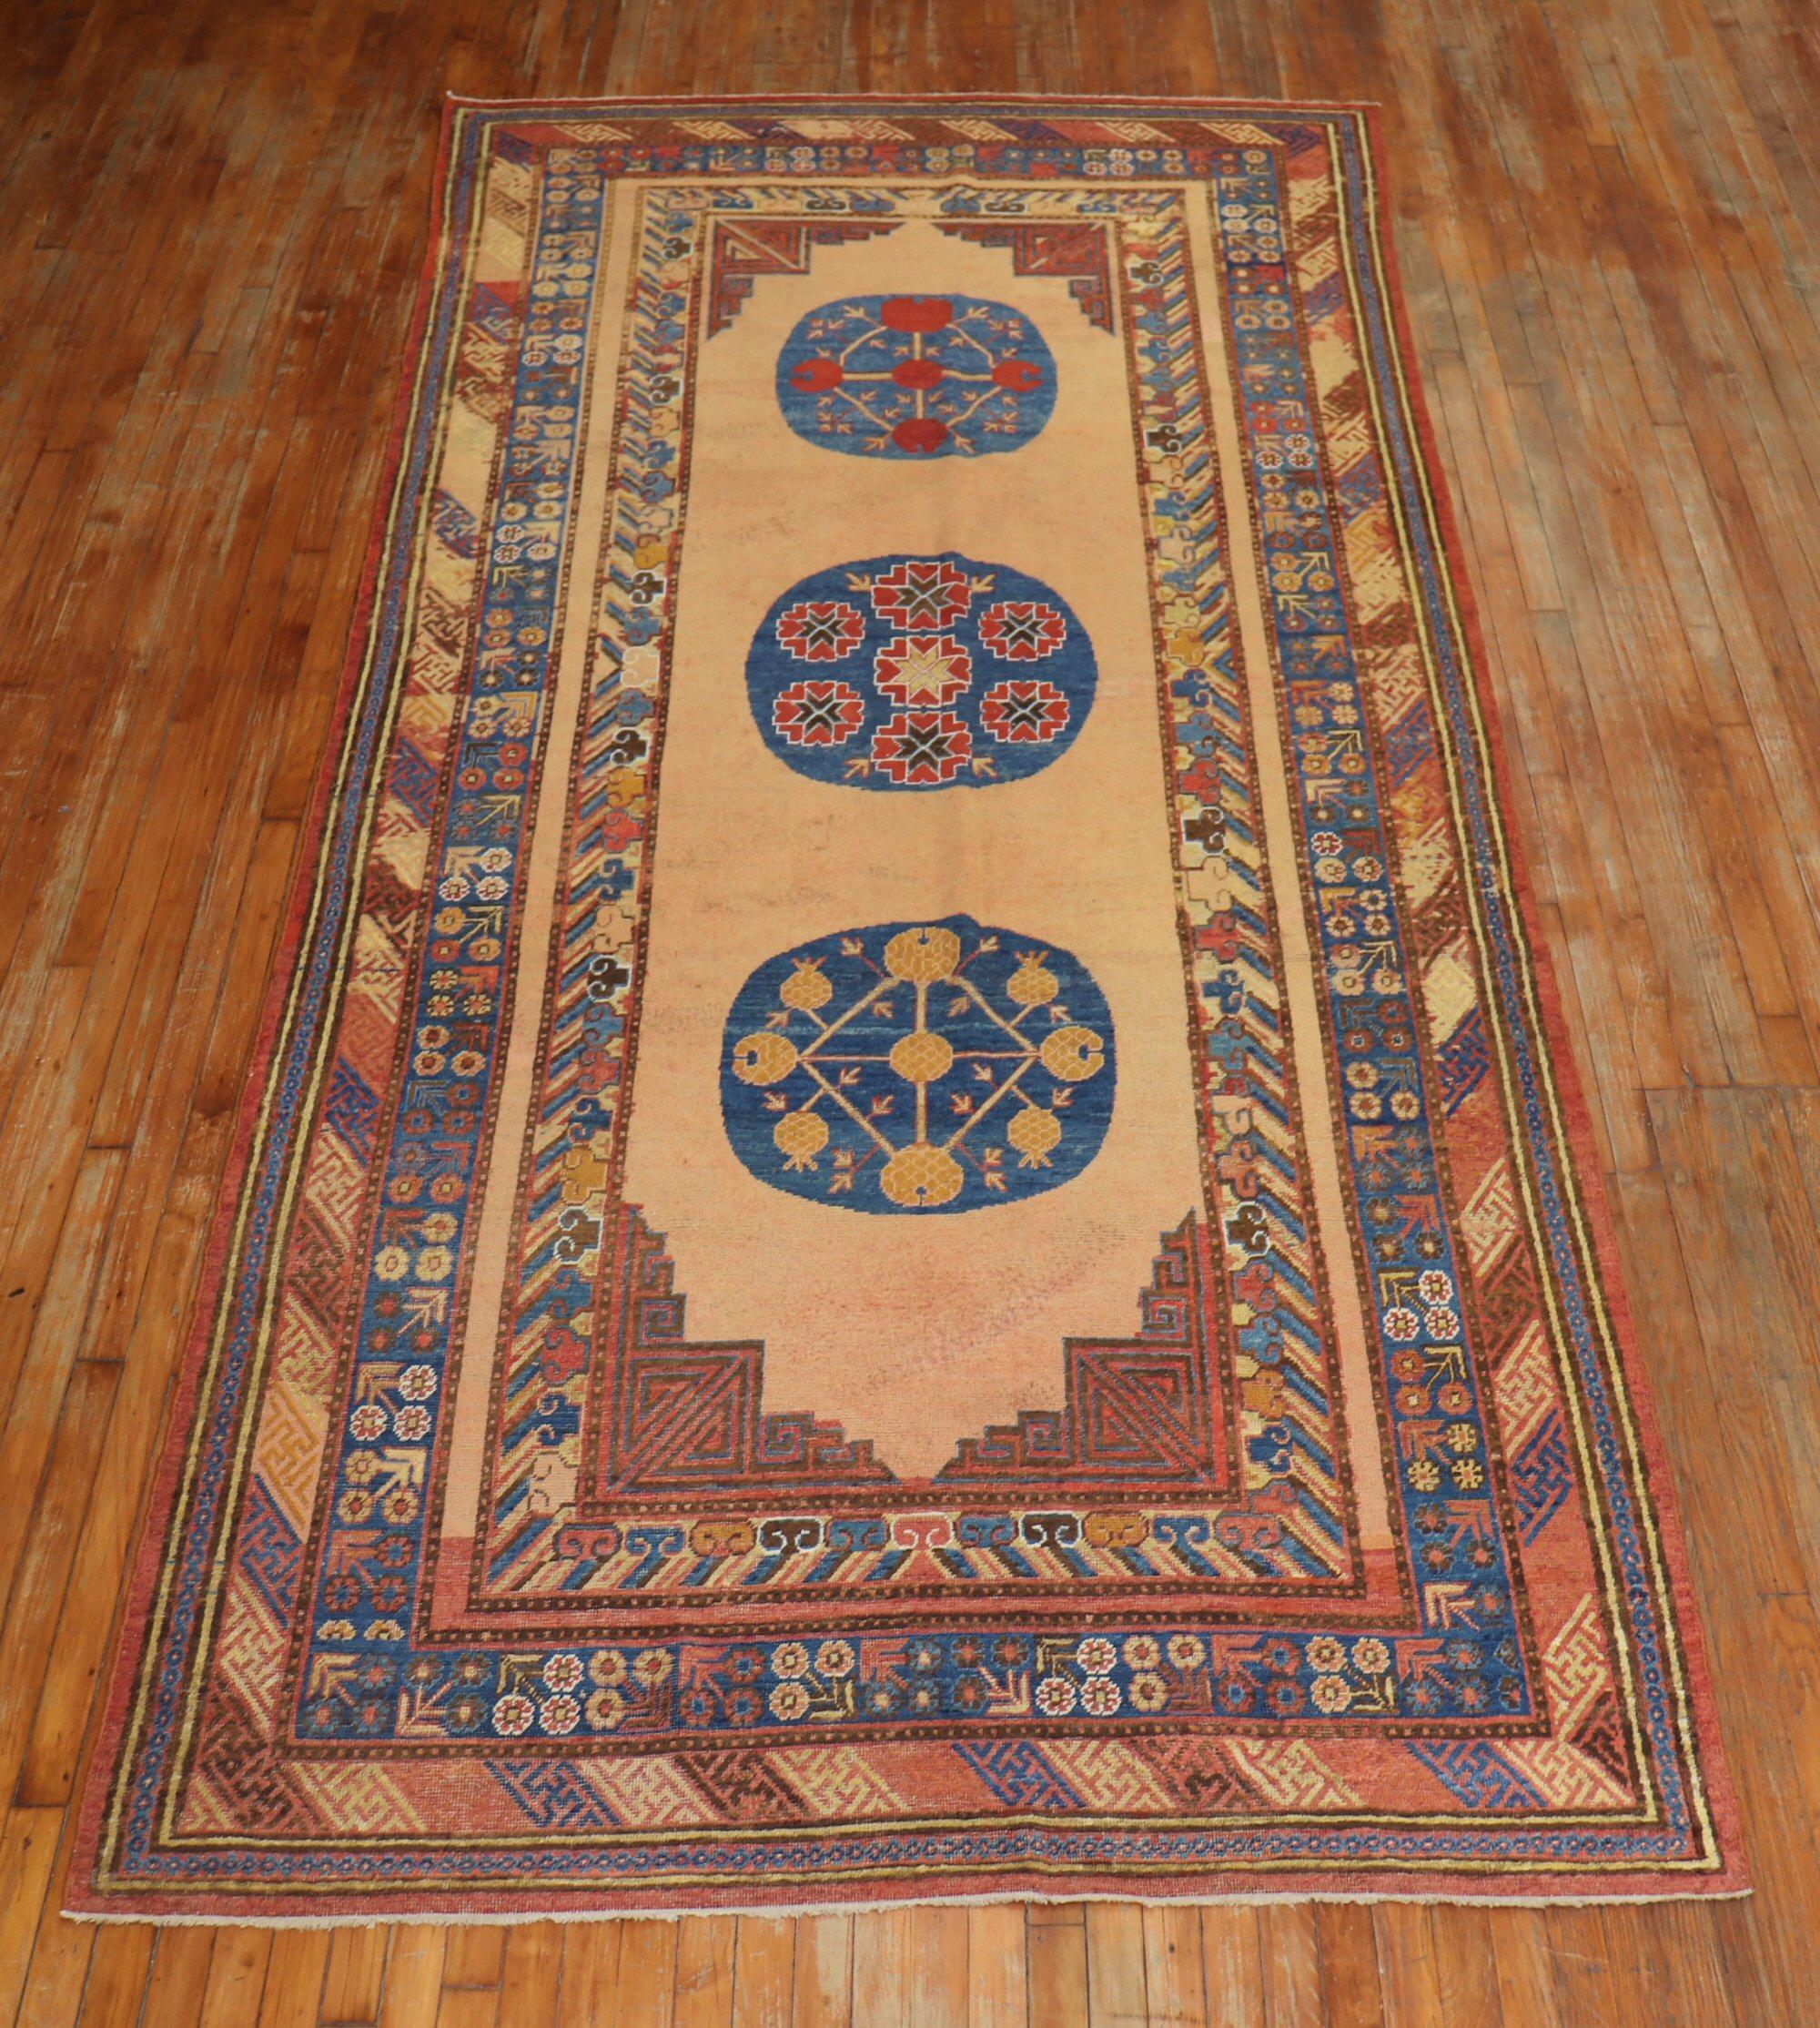 Early 20th century colorful antique Khotan gallery rug. The field is a bone color, denim blue, rust accents are dominant. 

Measures: 5'8